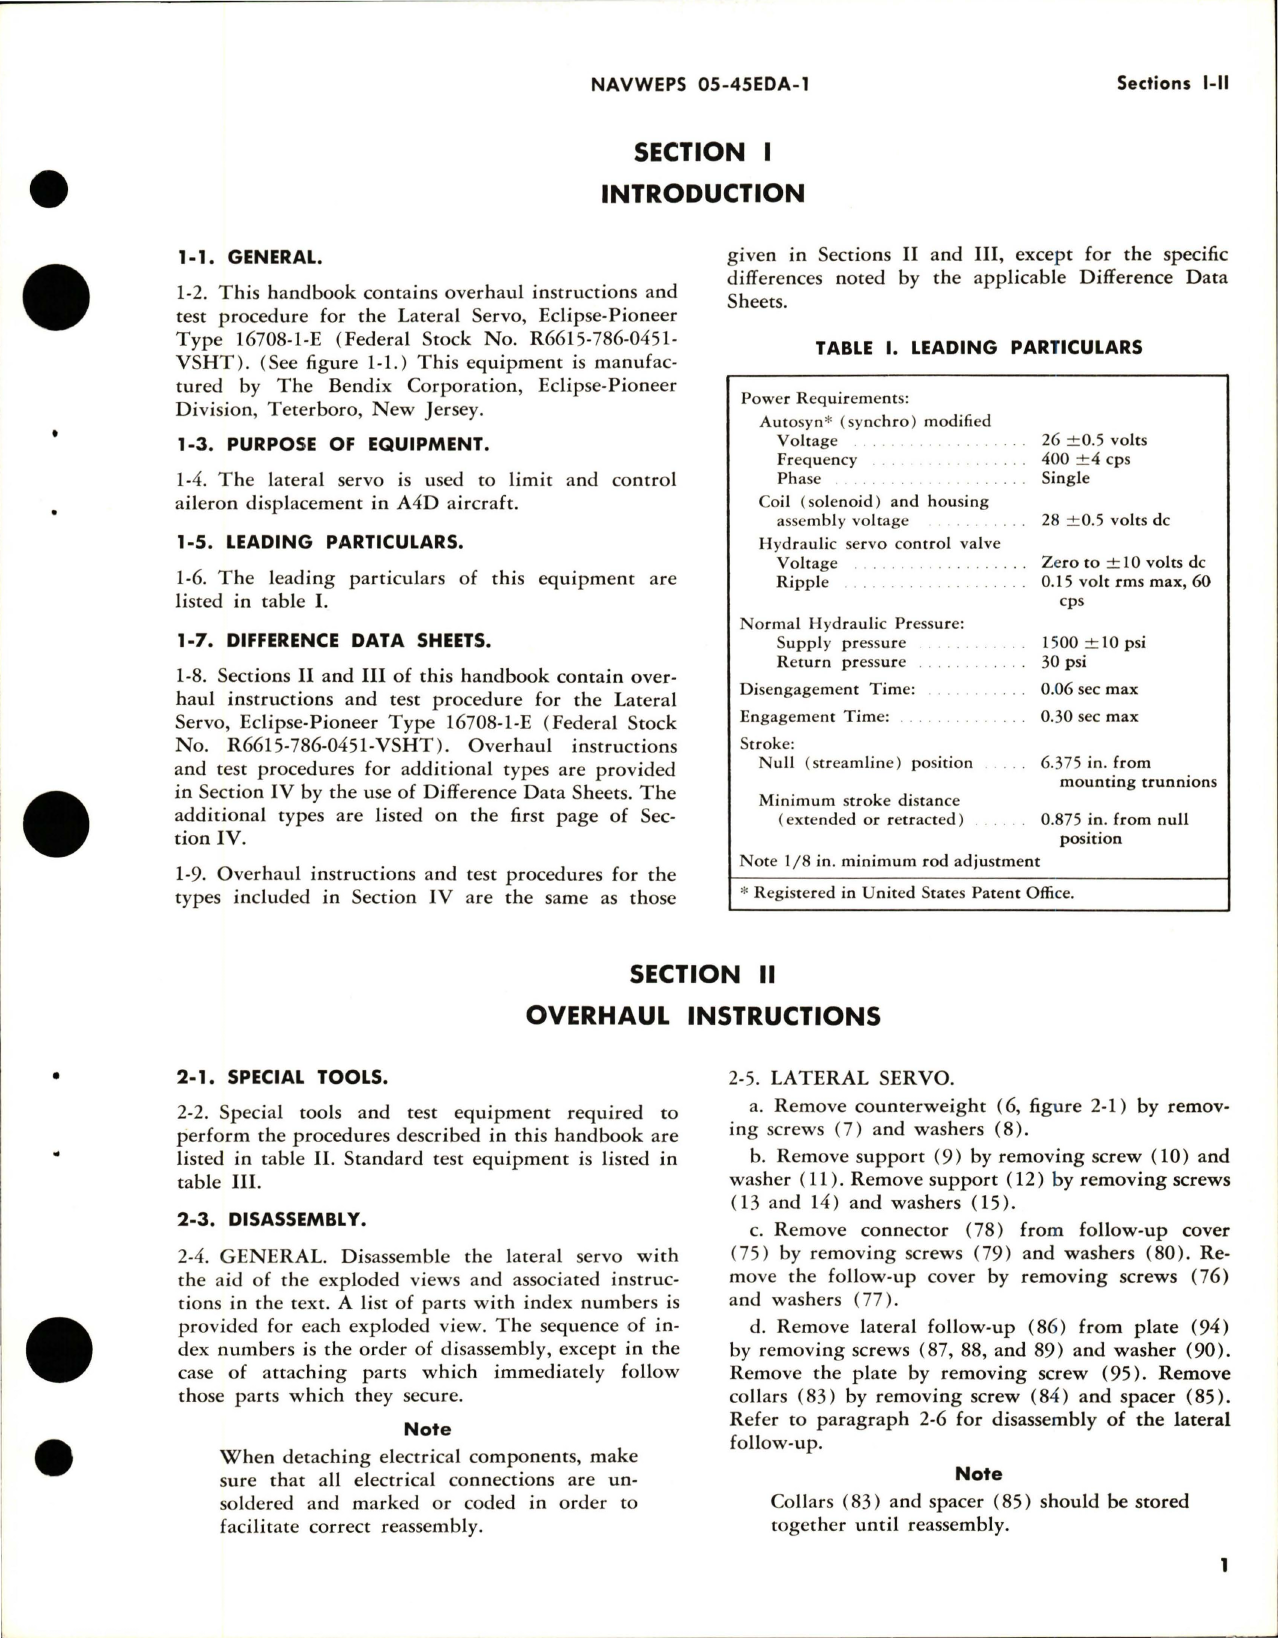 Sample page 5 from AirCorps Library document: Overhaul Instructions for Lateral Servo - Parts 16708-1-E and16730-1-A